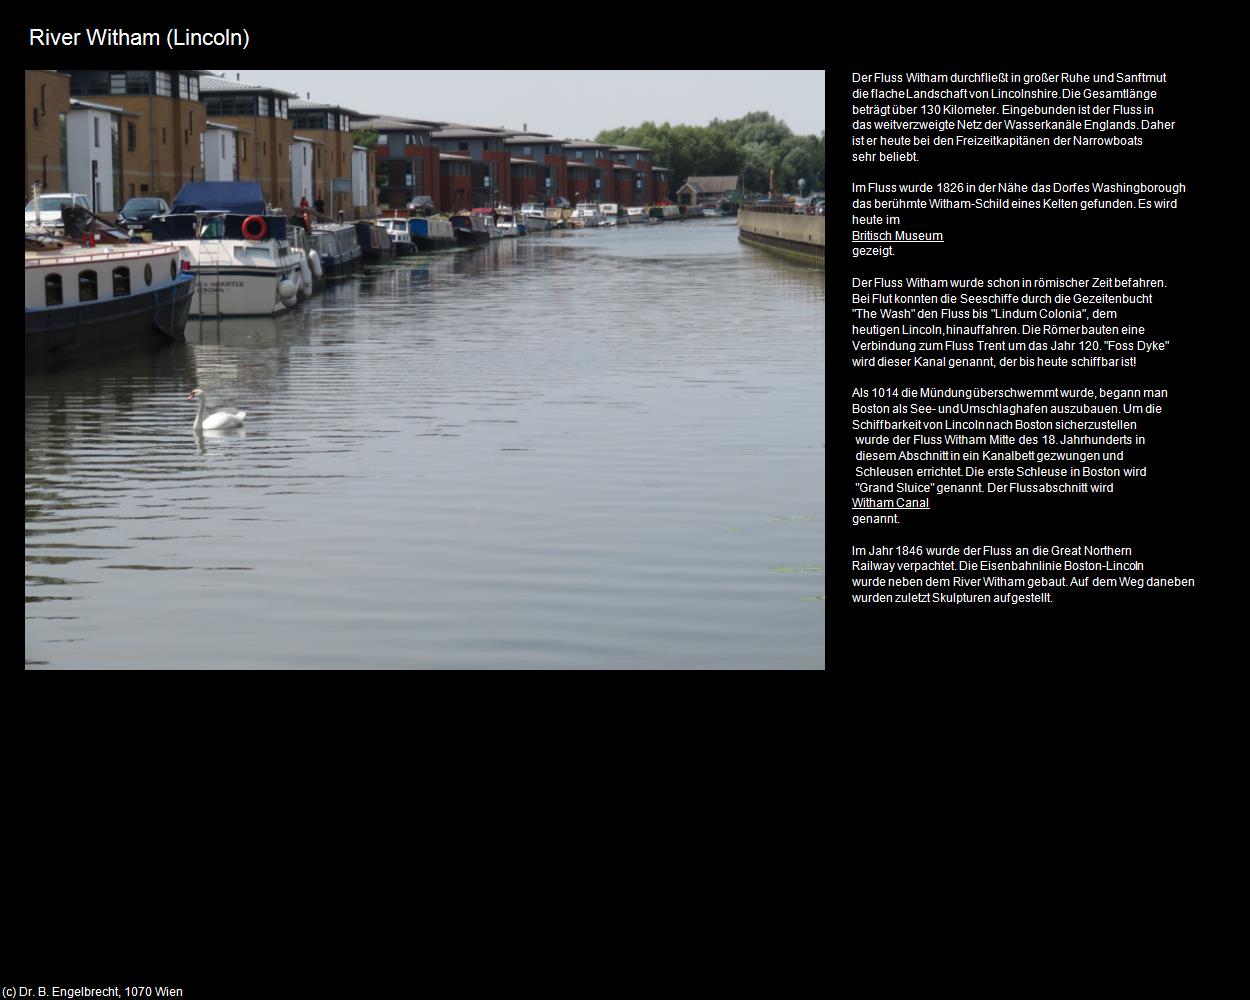 River Witham  (Lincoln, England) in Kulturatlas-ENGLAND und WALES(c)B.Engelbrecht